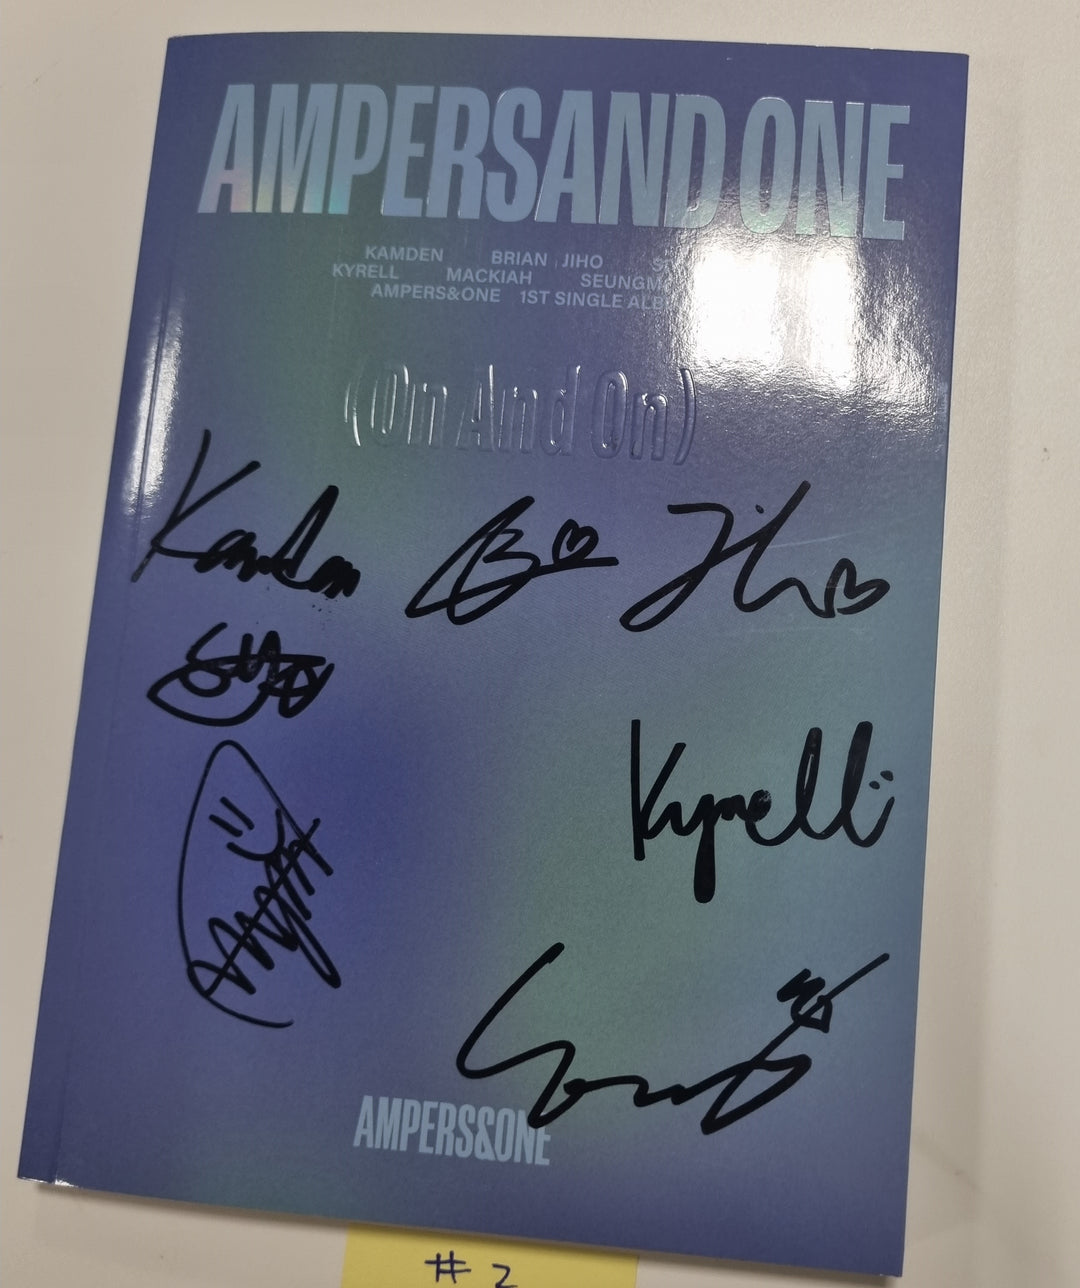 AMPERS&ONE "AMPERSAND ONE" - Hand Autographed(Signed) Promo Album [23.11.21]